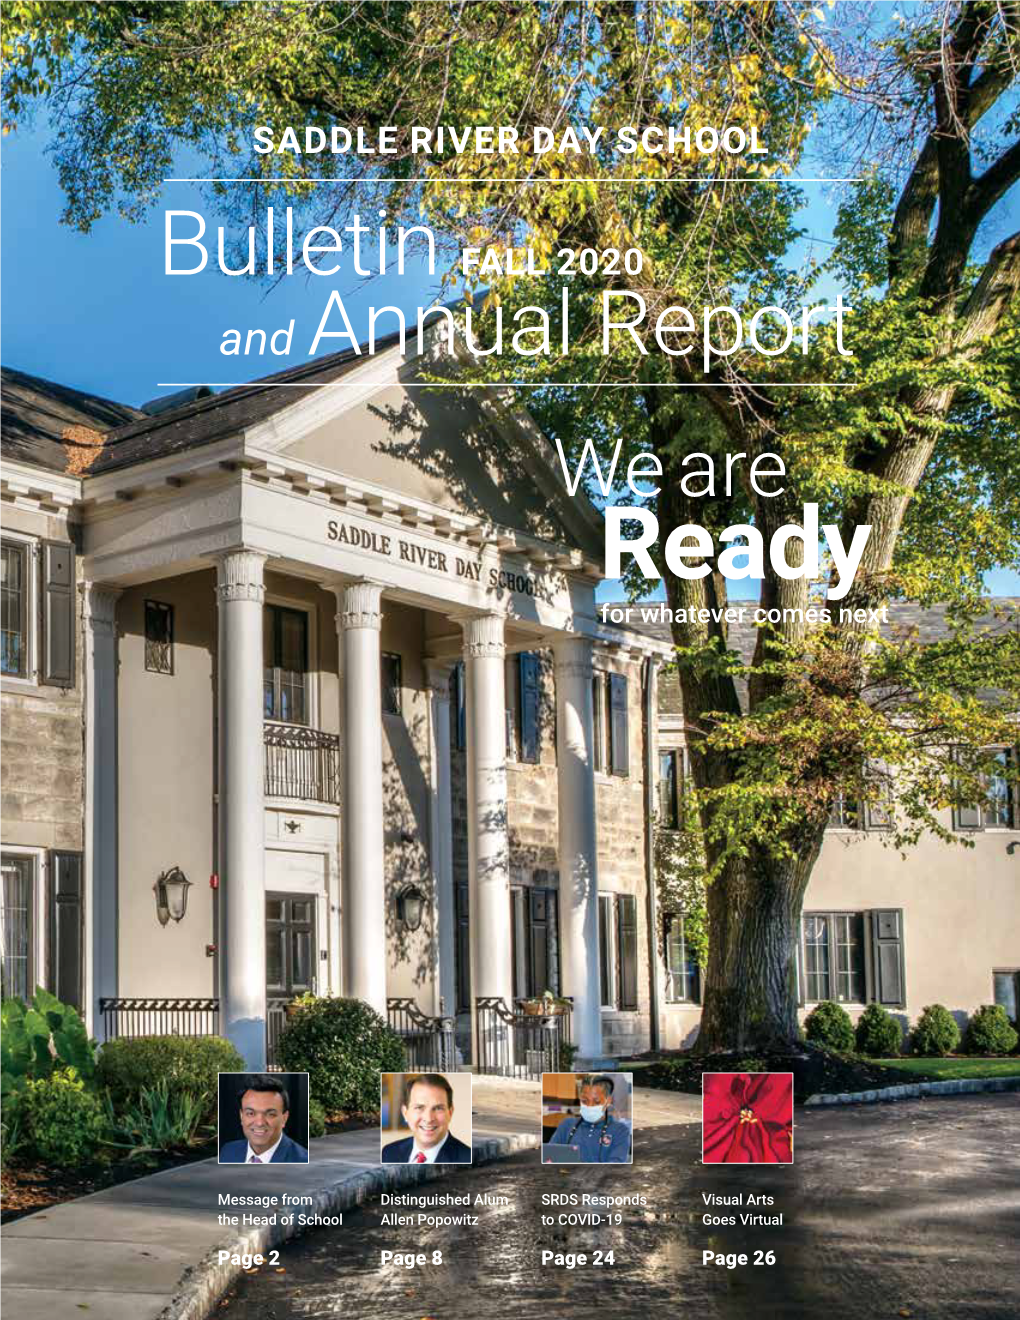 Bulletin FALL 2020 and Annual Report We Are Ready for Whatever Comes Next